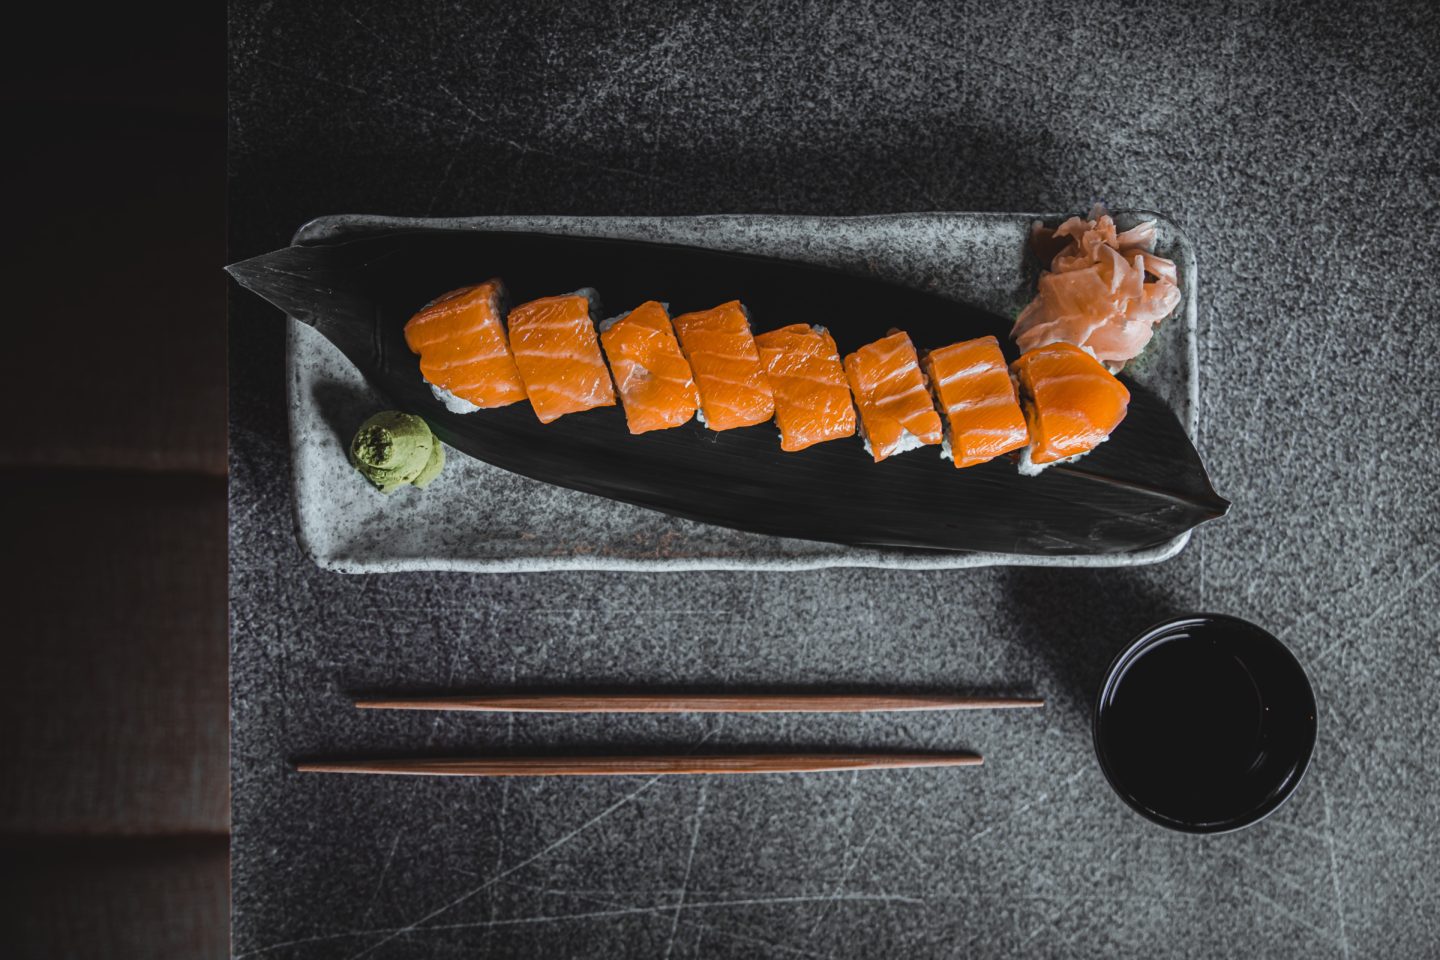 SUSHI SEN: BEST PLACE TO EAT SUSHI IN ROME